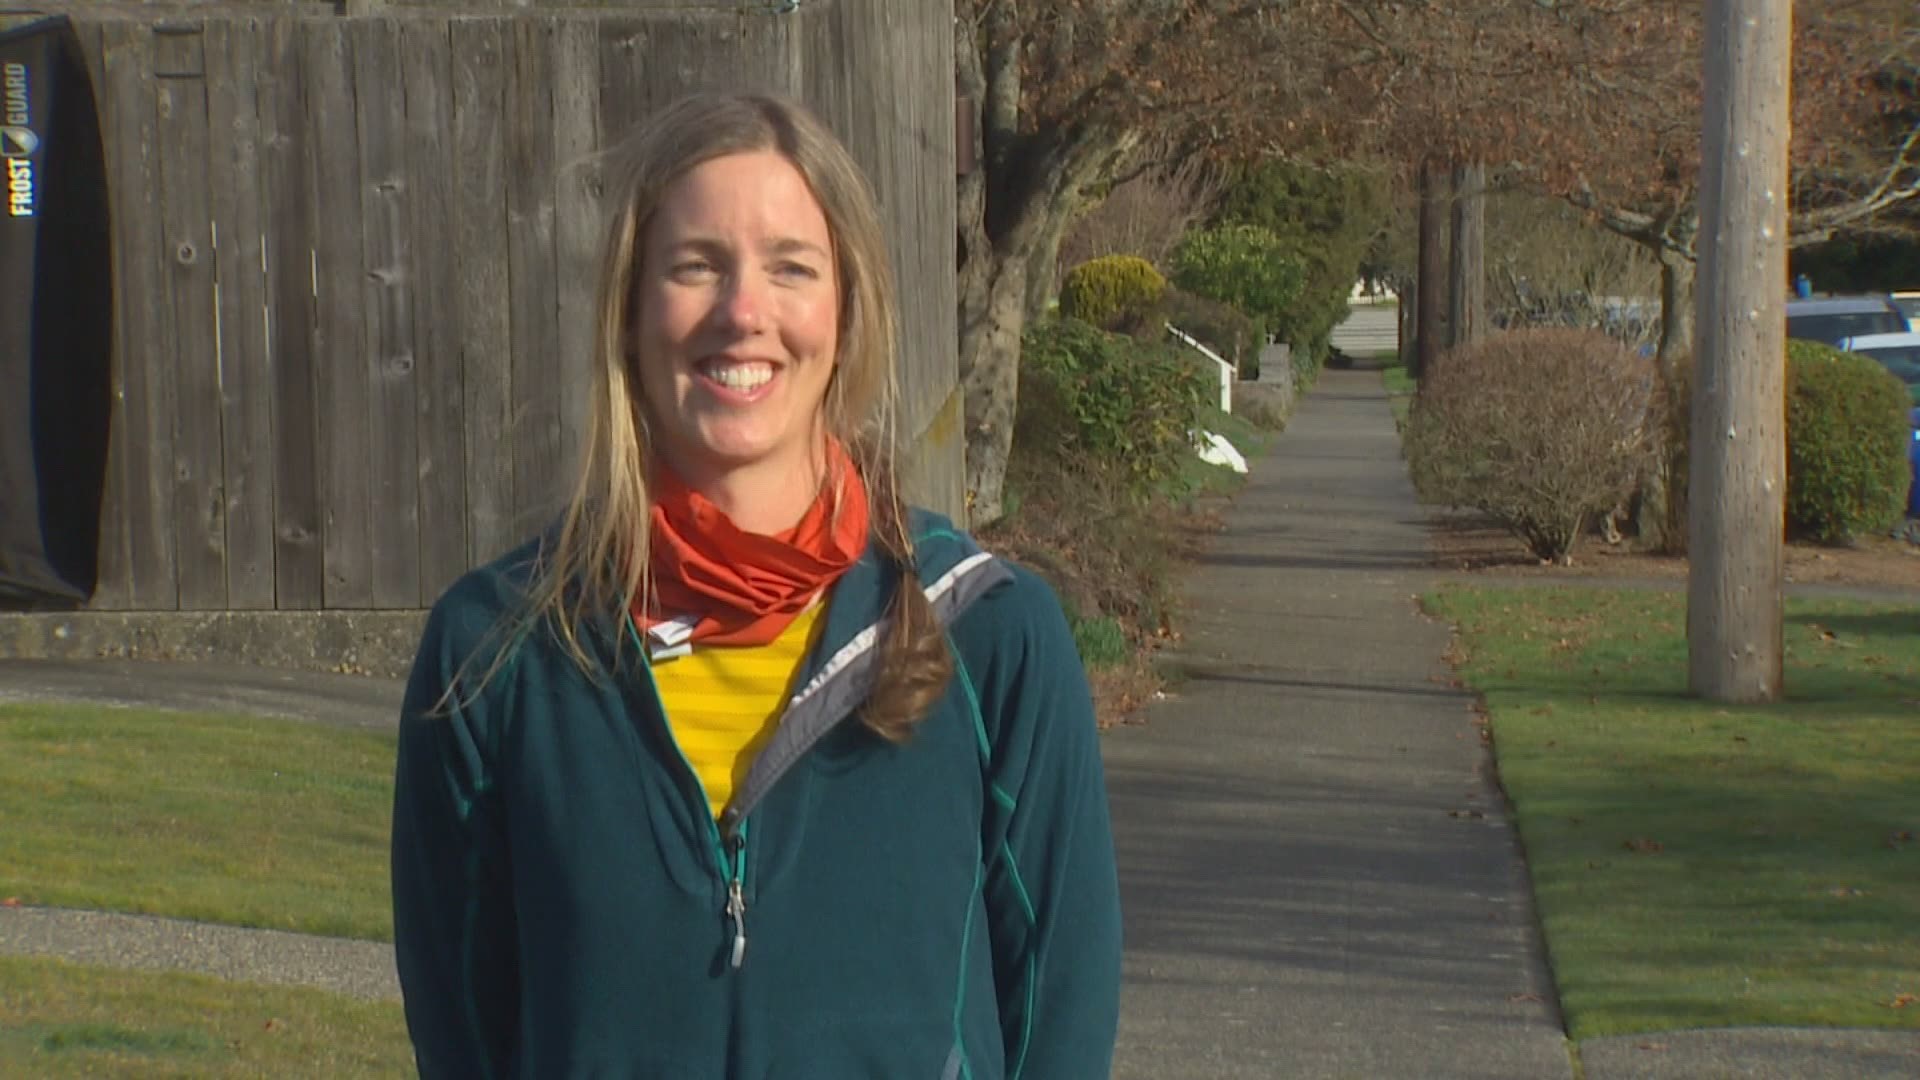 Over her year of running, Susan Curran traveled 440 miles with 45,000 feet of elevation gain. That's higher than Mount Everest.